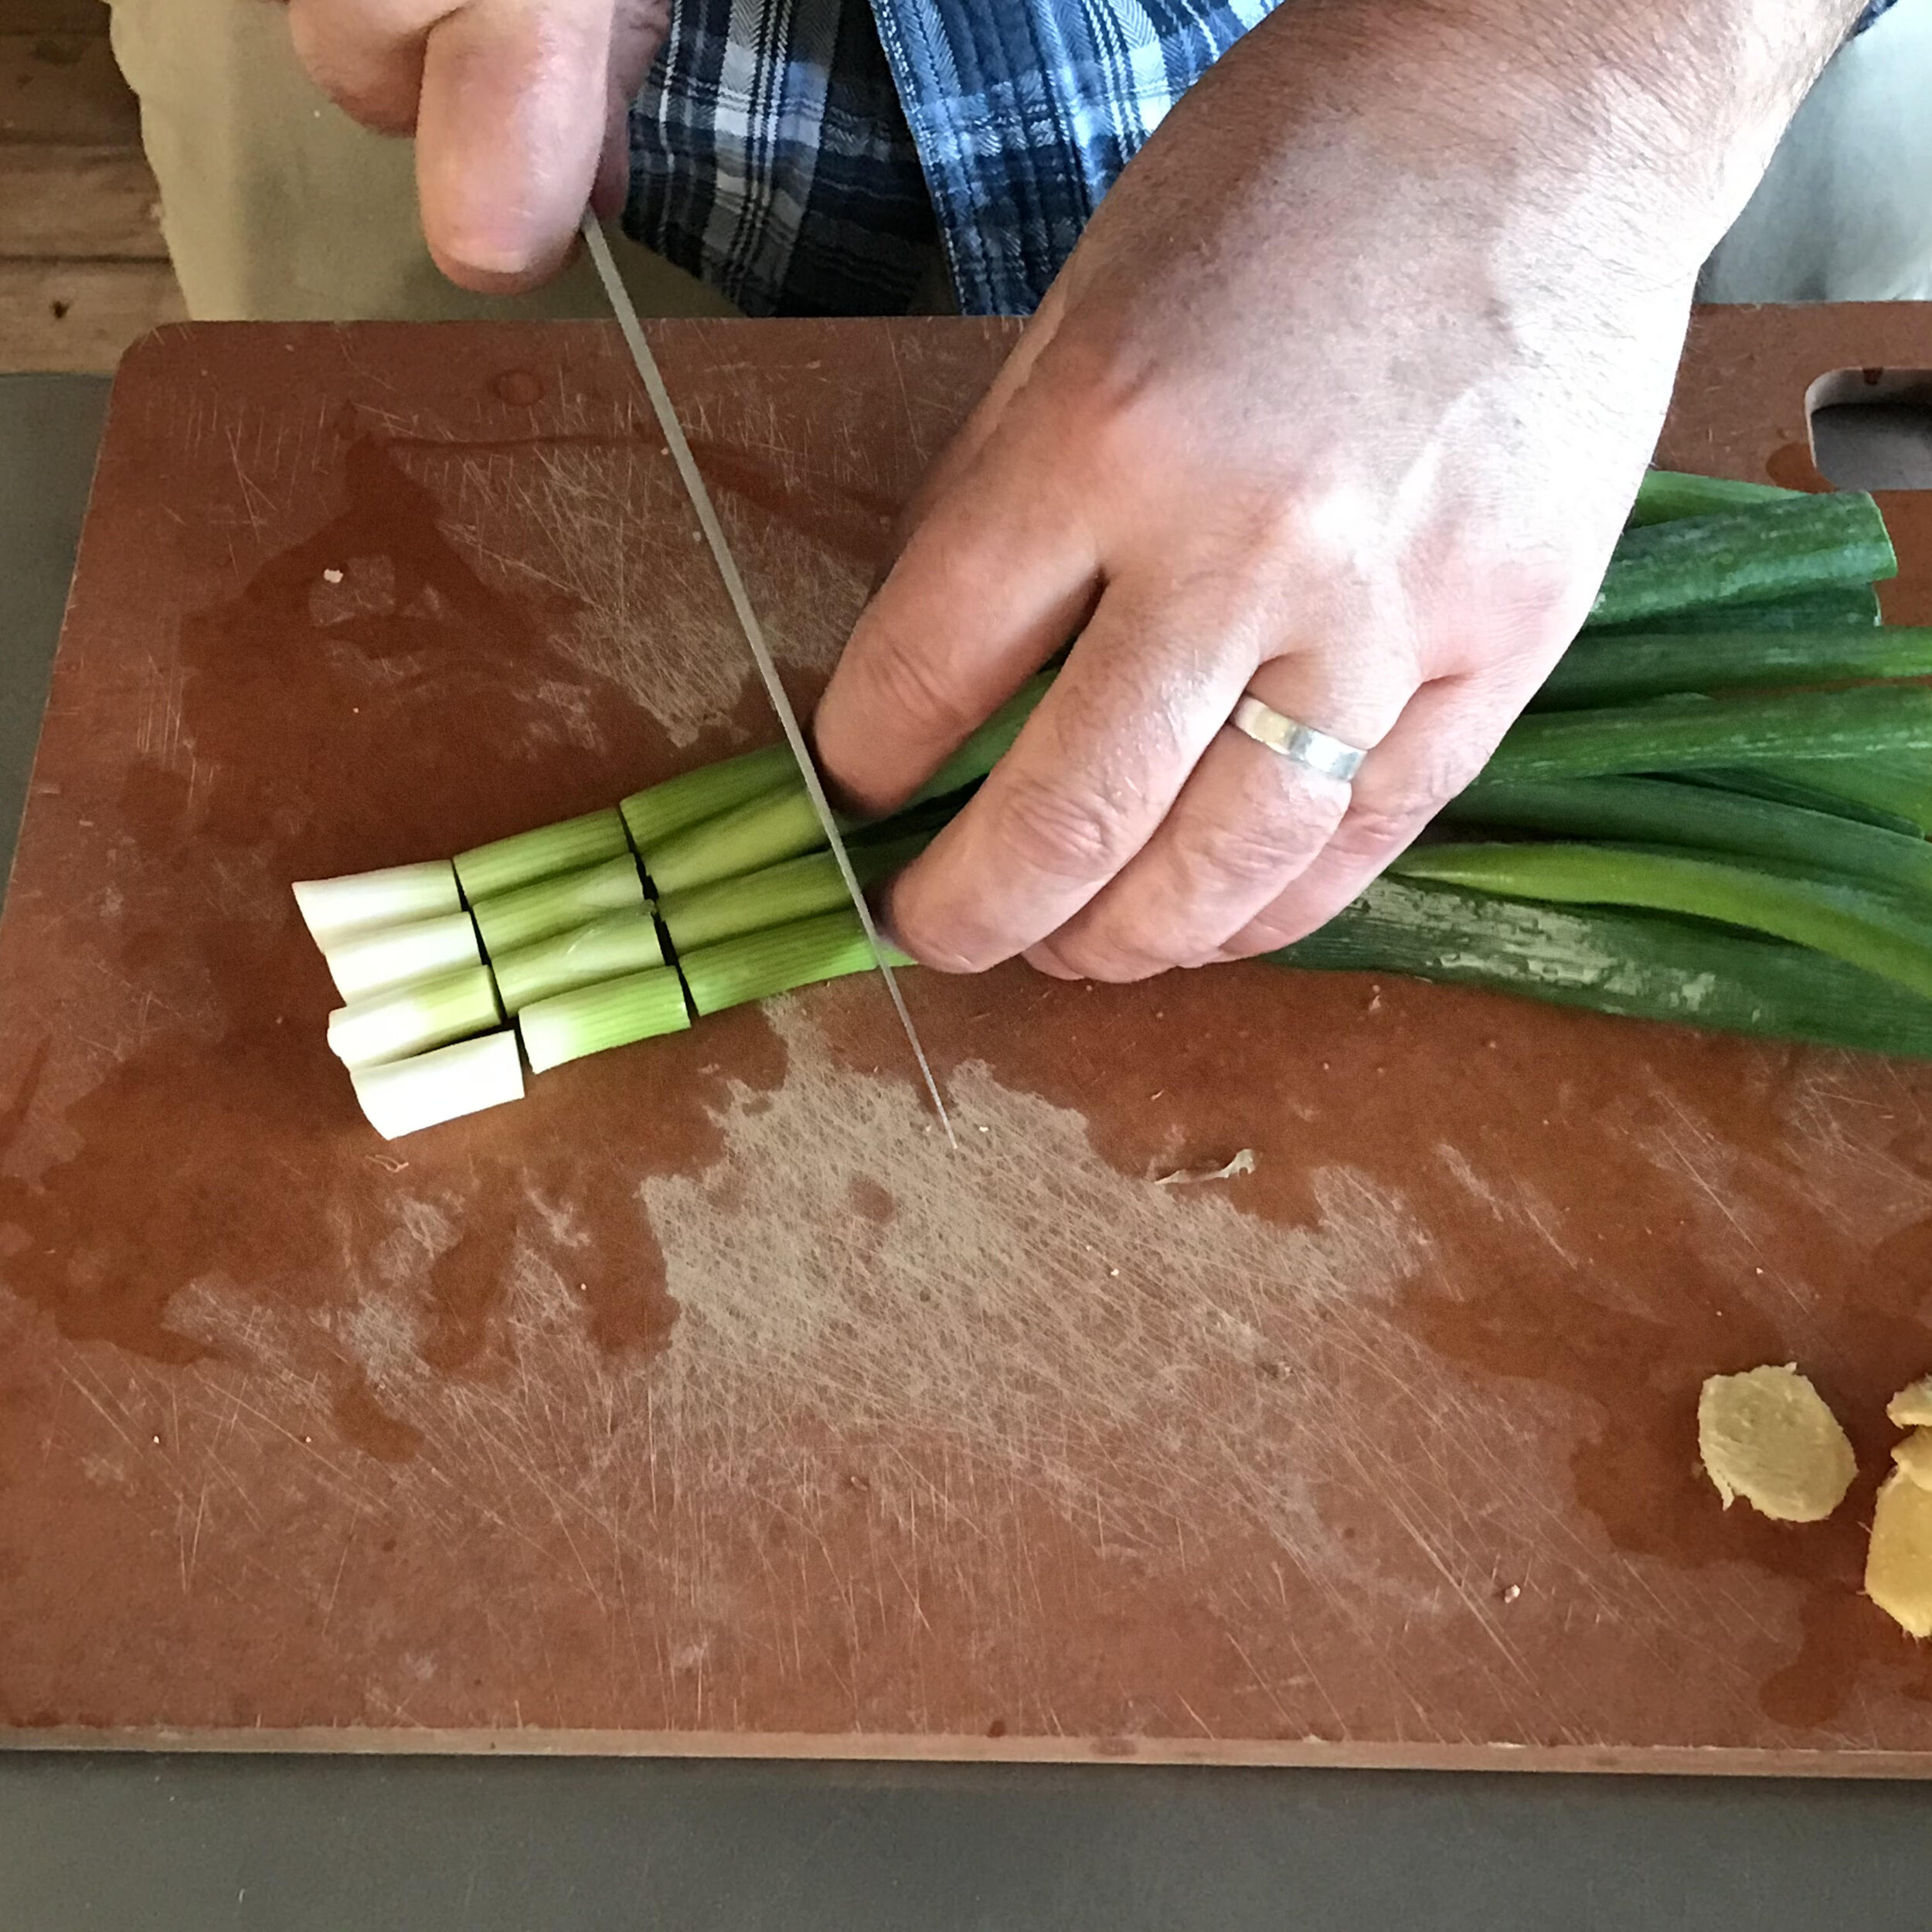 4. Cut stem portion of scallions into 1-inch pieces.